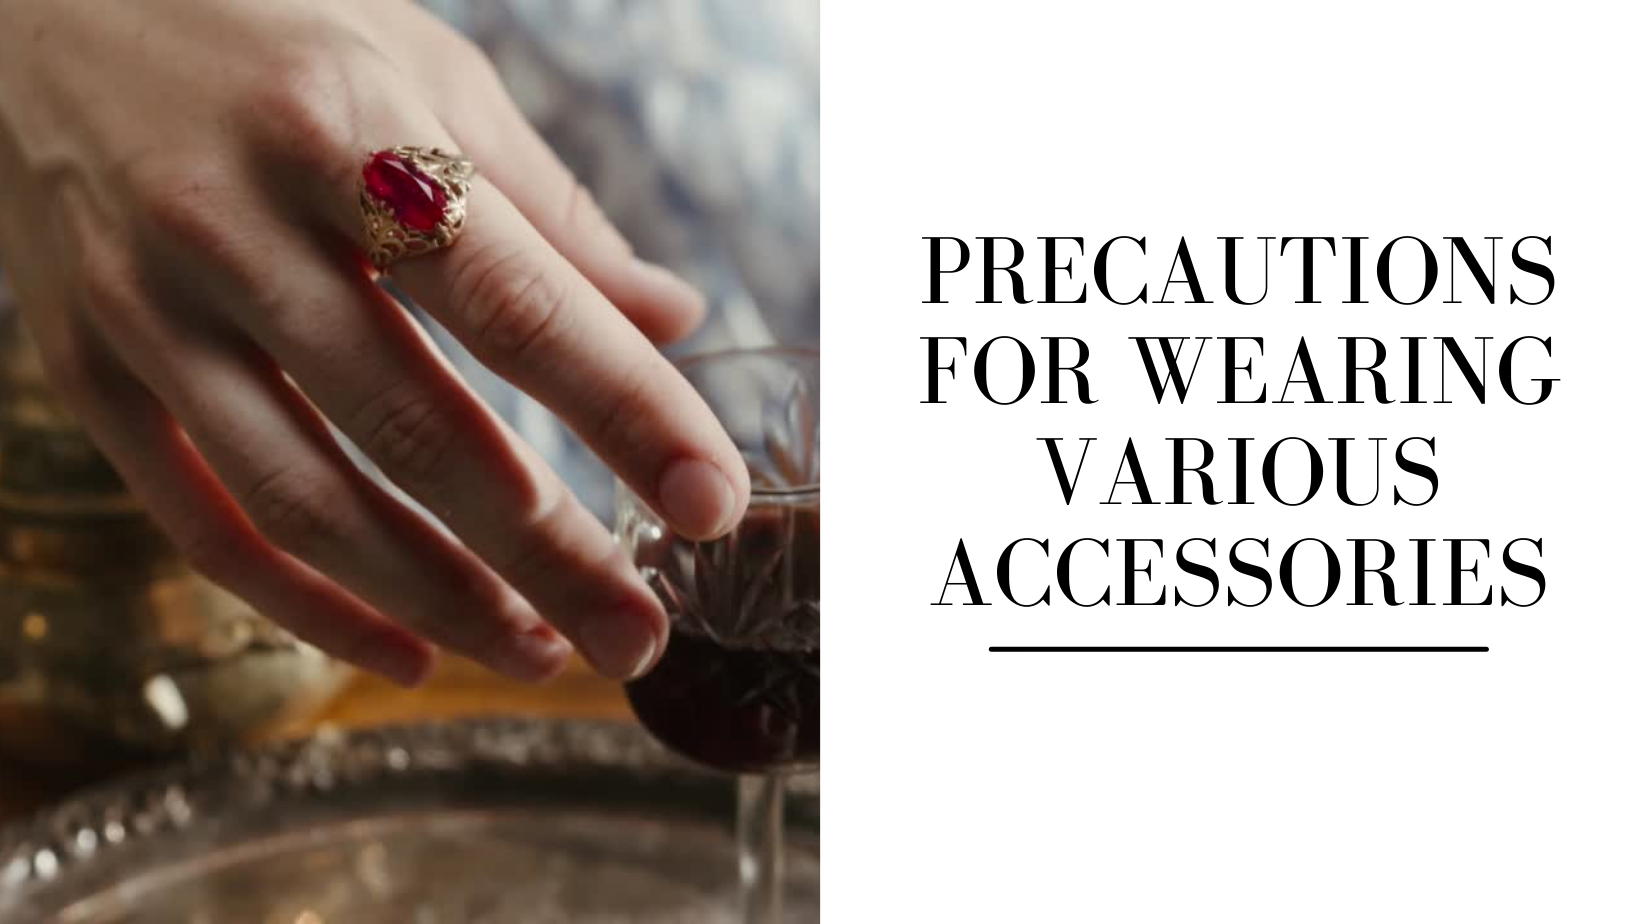 Precautions for wearing various accessories